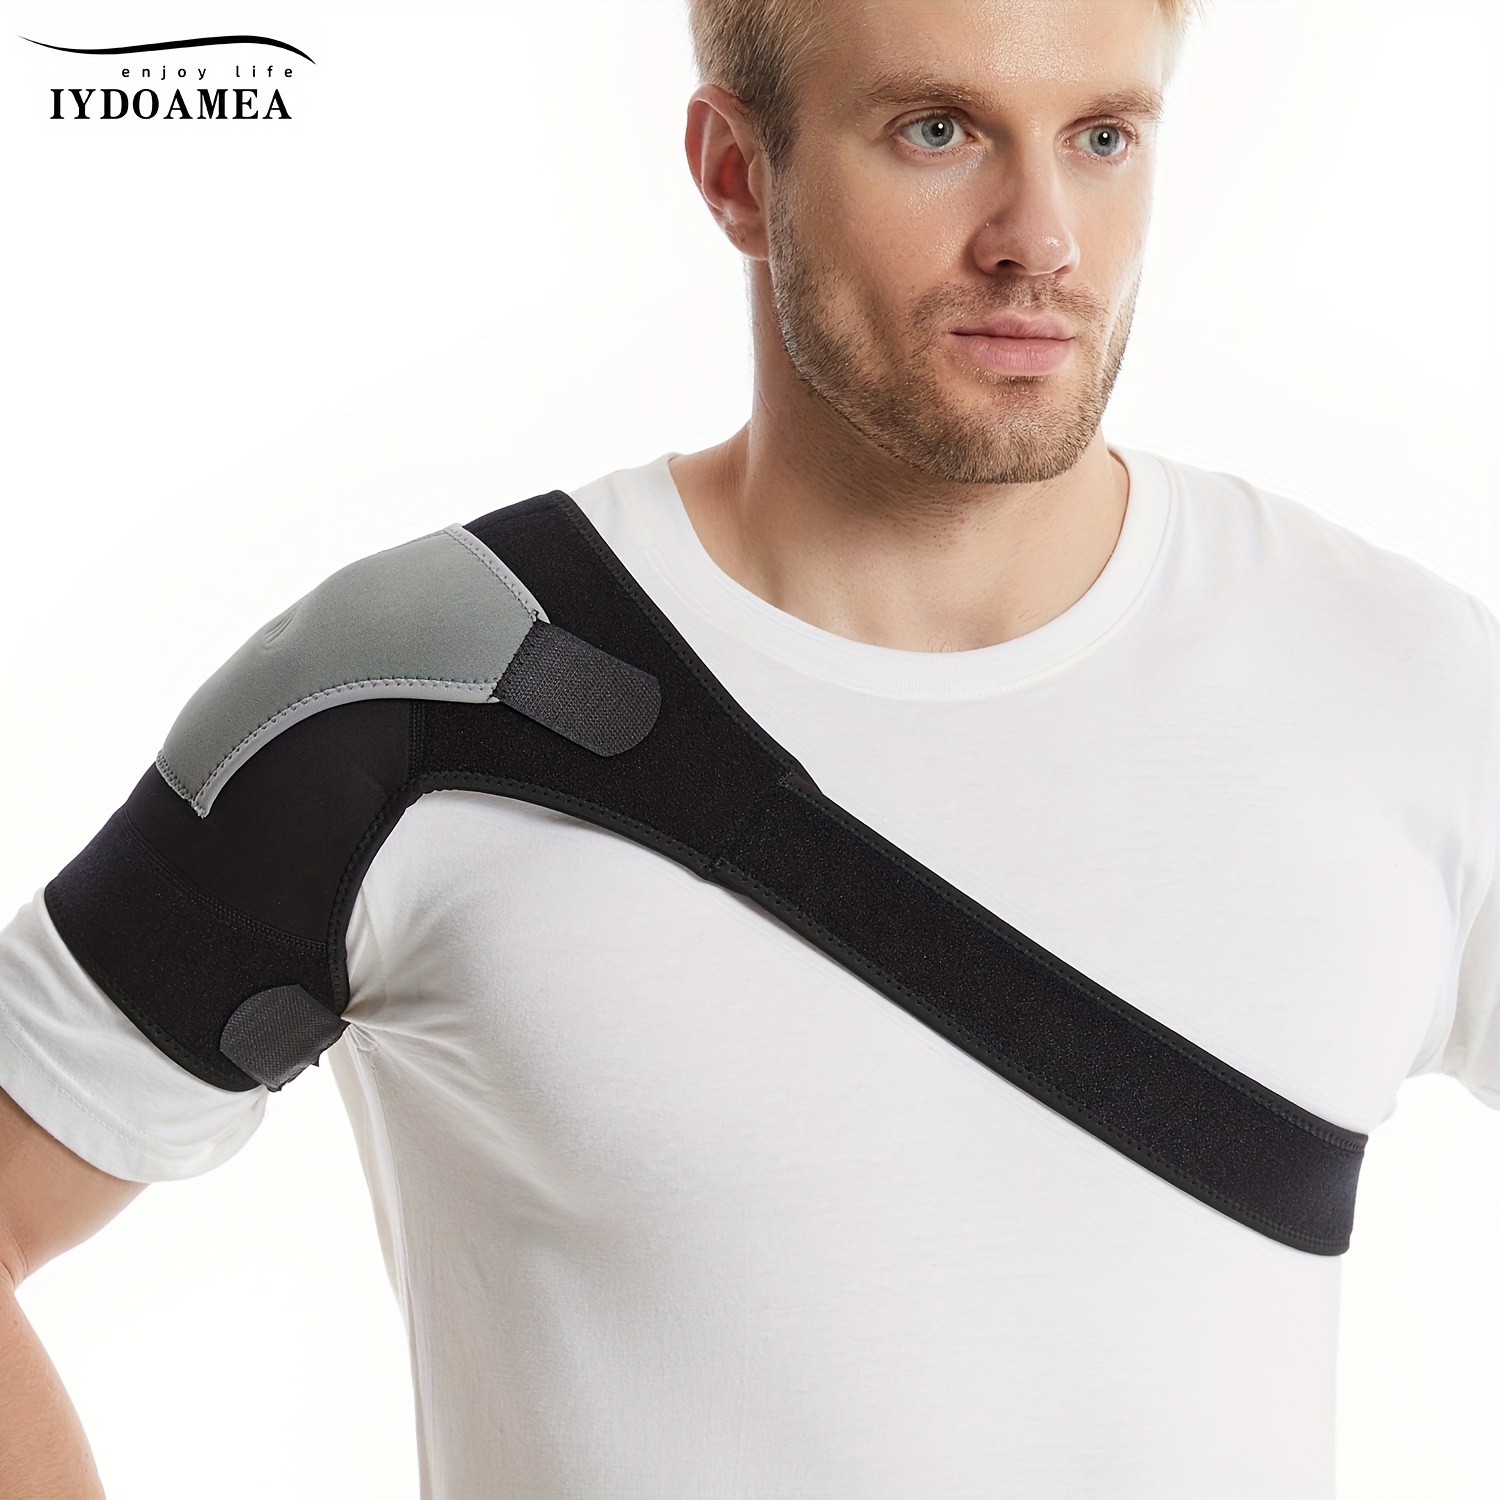  Sparthos Shoulder Brace - Support and Compression Sleeve for  Torn Rotator Cuff, AC Joint Pain Relief - Arm Immobilizer Wrap, Ice Pack  Pocket, Stability Strap, Dislocated Sholder - for Men and